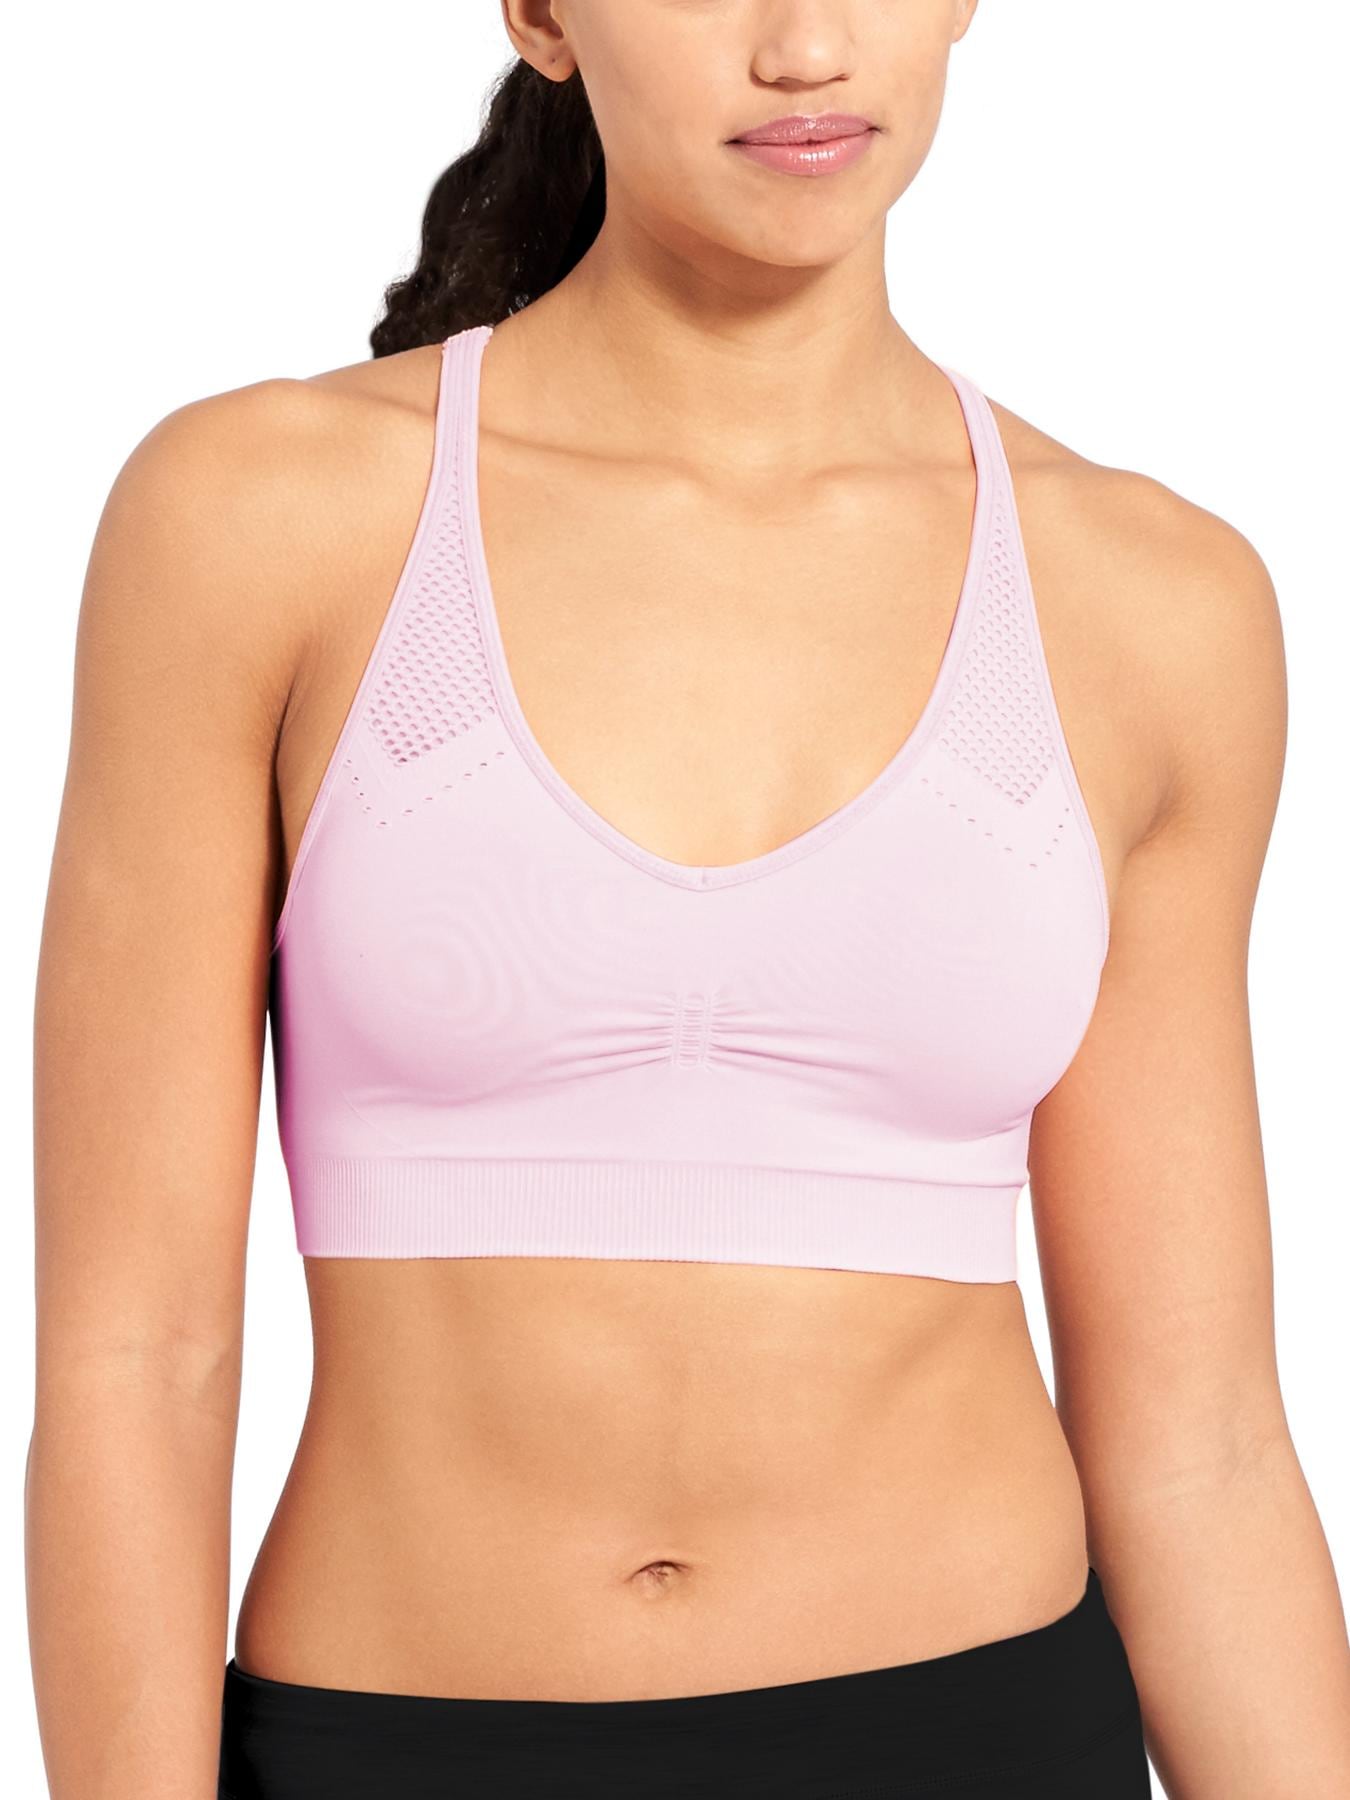 On the lookout for a high impact wirefree sports bra? Well have we